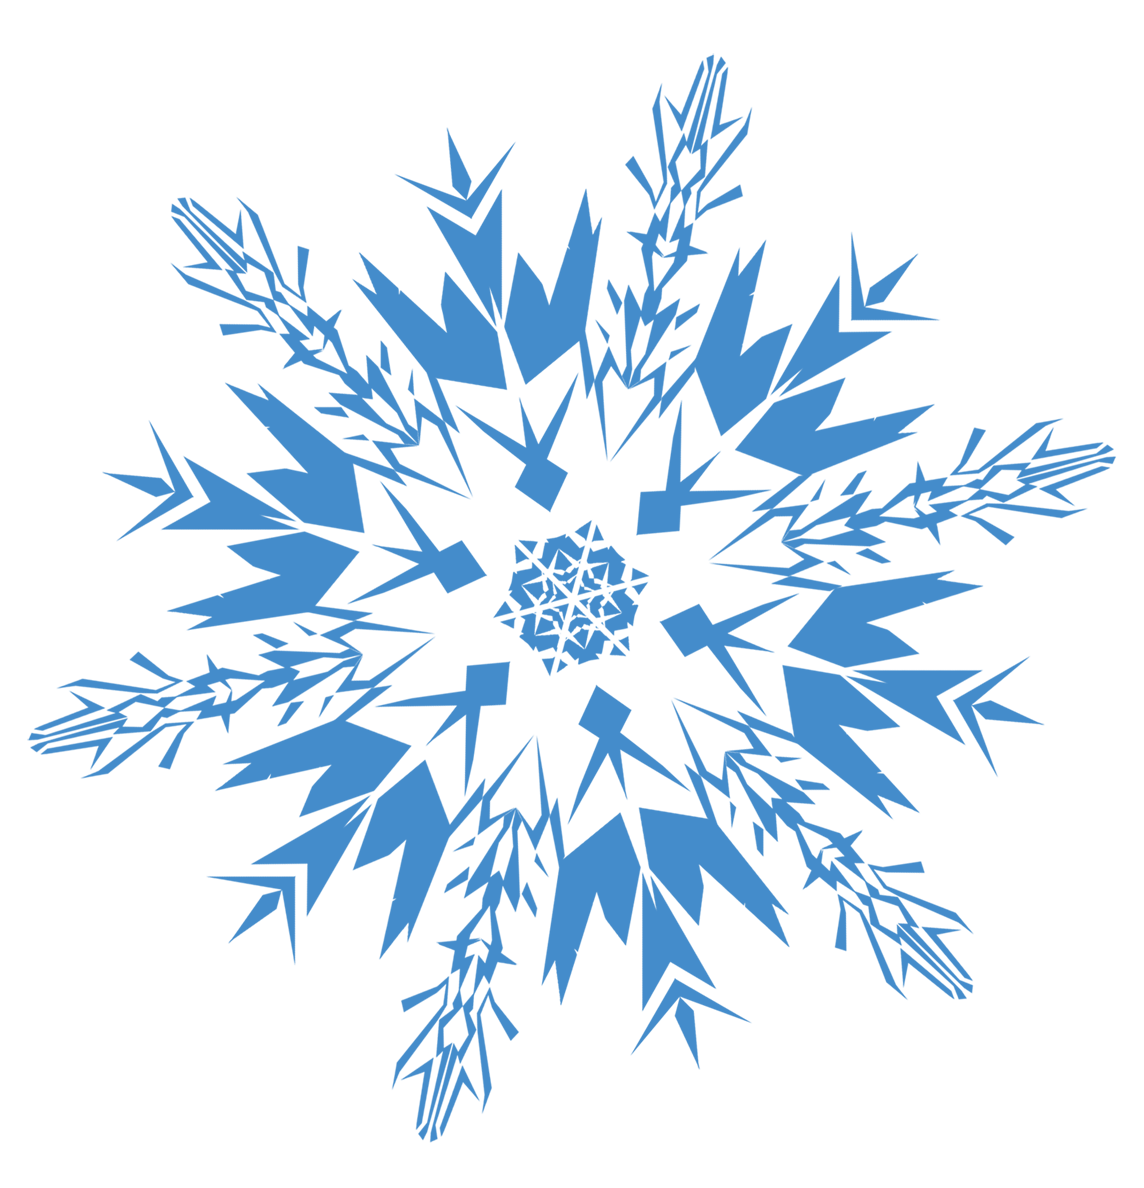 snowflakes transparent background png